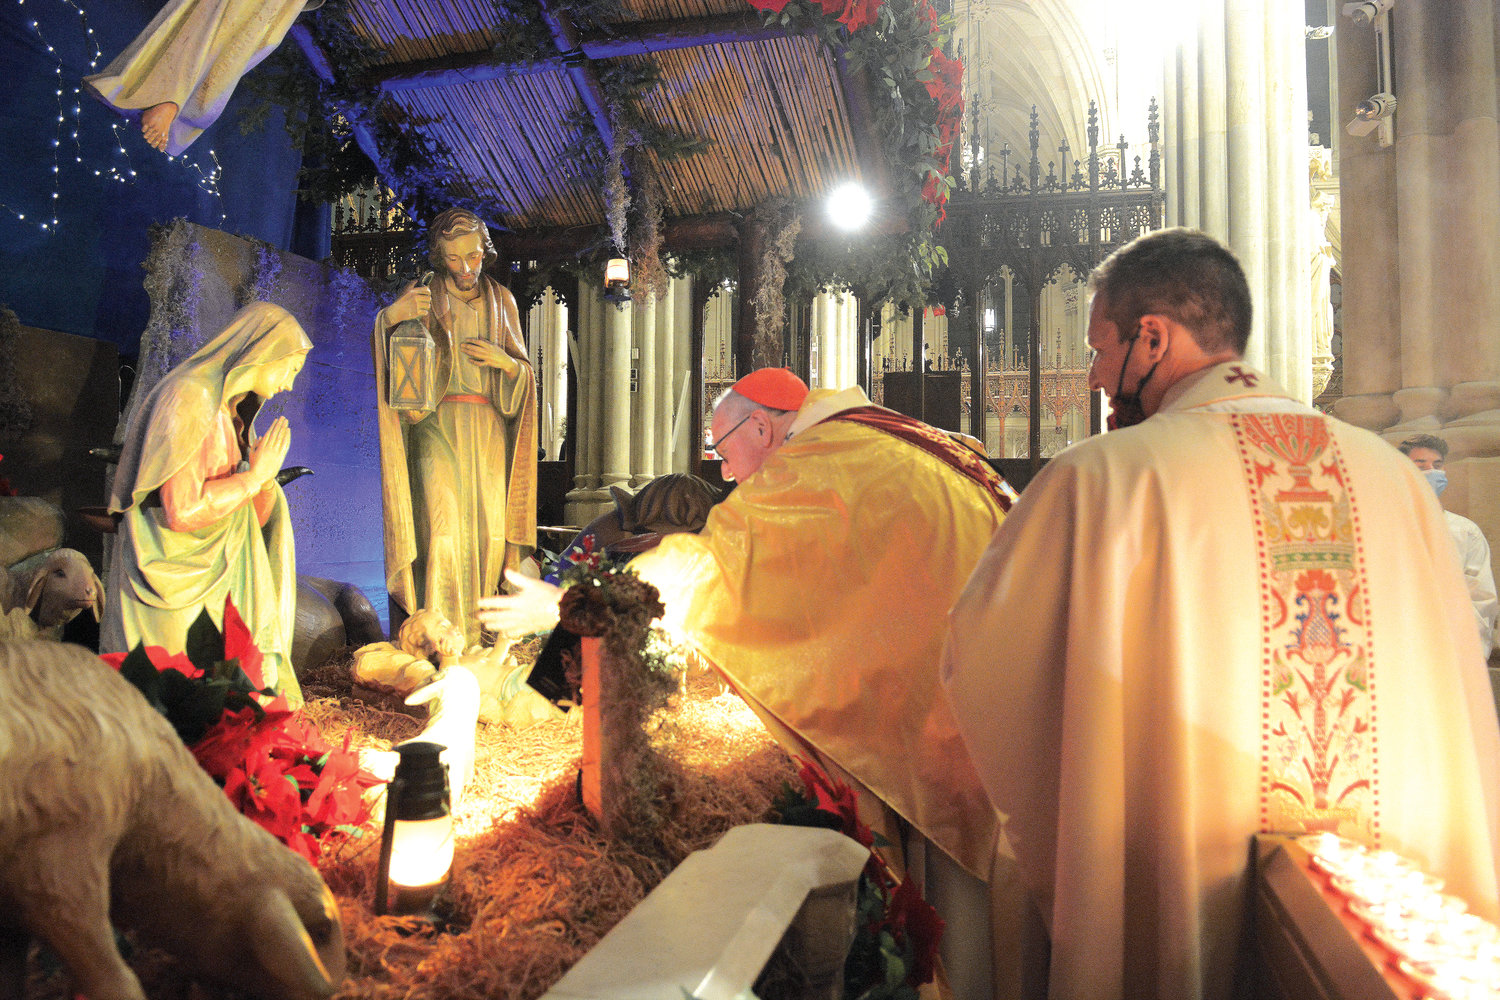 O HOLY NIGHT—Cardinal Dolan gently places a statue of the Infant Jesus in the creche at St. Patrick’s Cathedral during Christmas Midnight Mass Dec. 25. Father Enrique Salvo, cathedral rector, left, carried the statue in the procession before handing it to the cardinal in front of the creche.